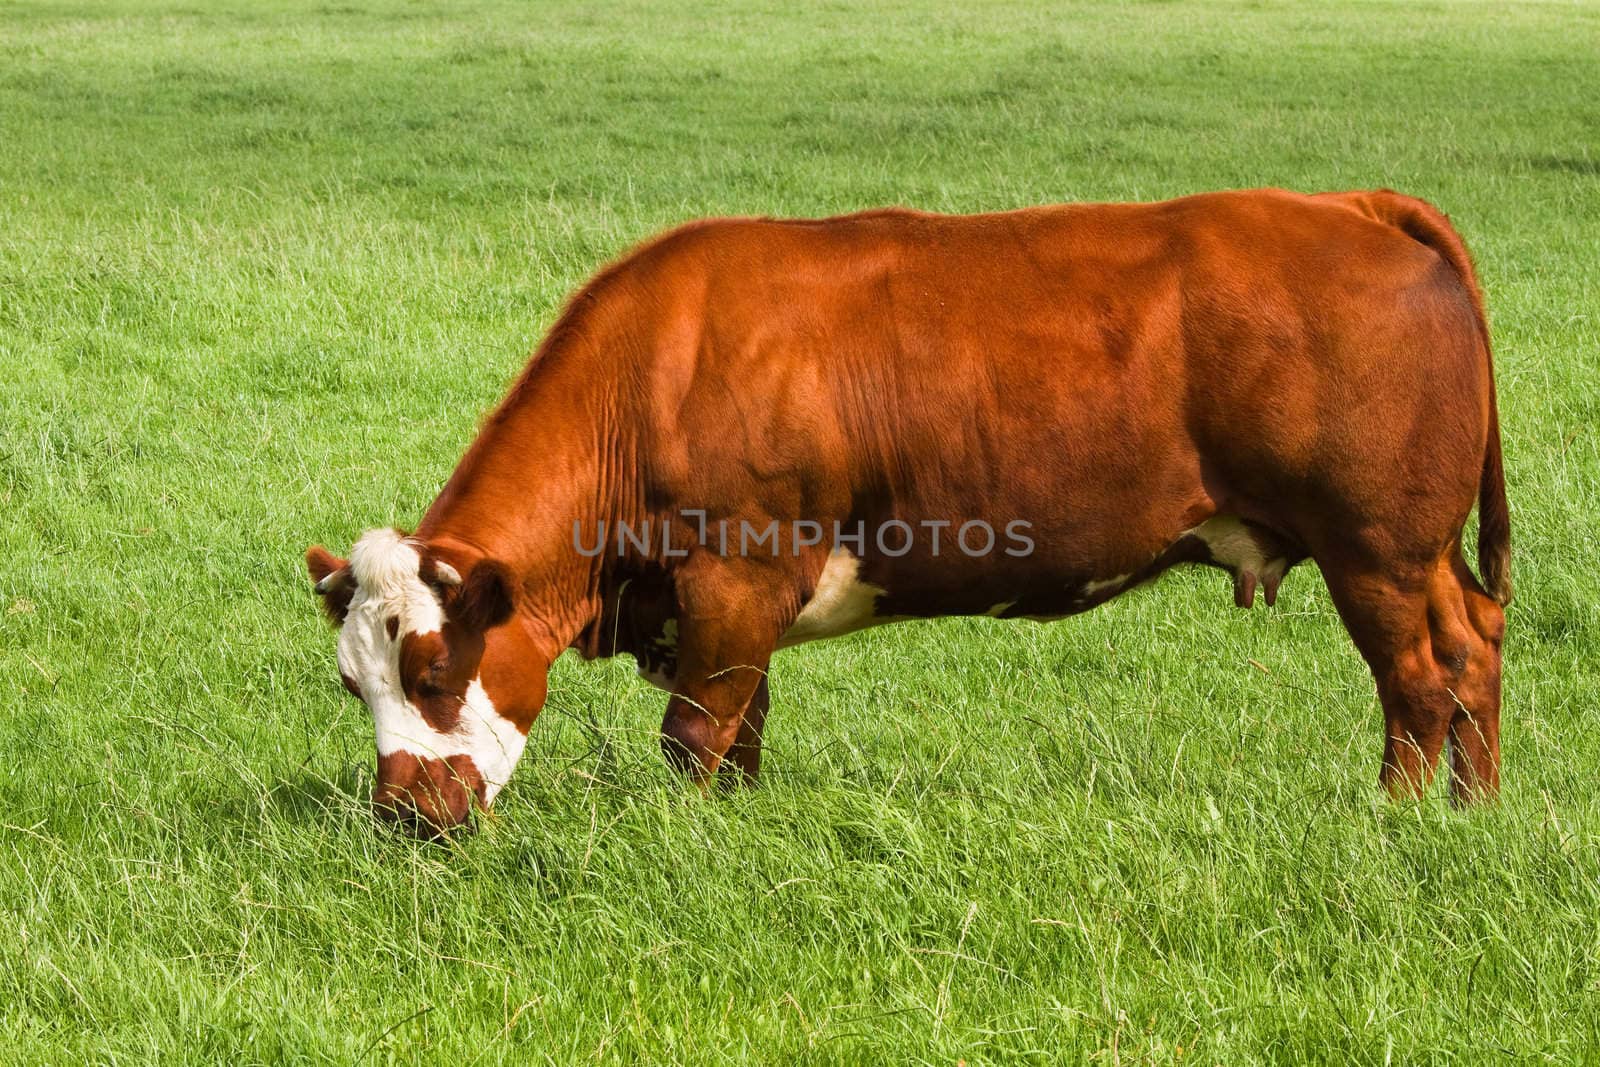 Grassland with grazing meat cow by Colette